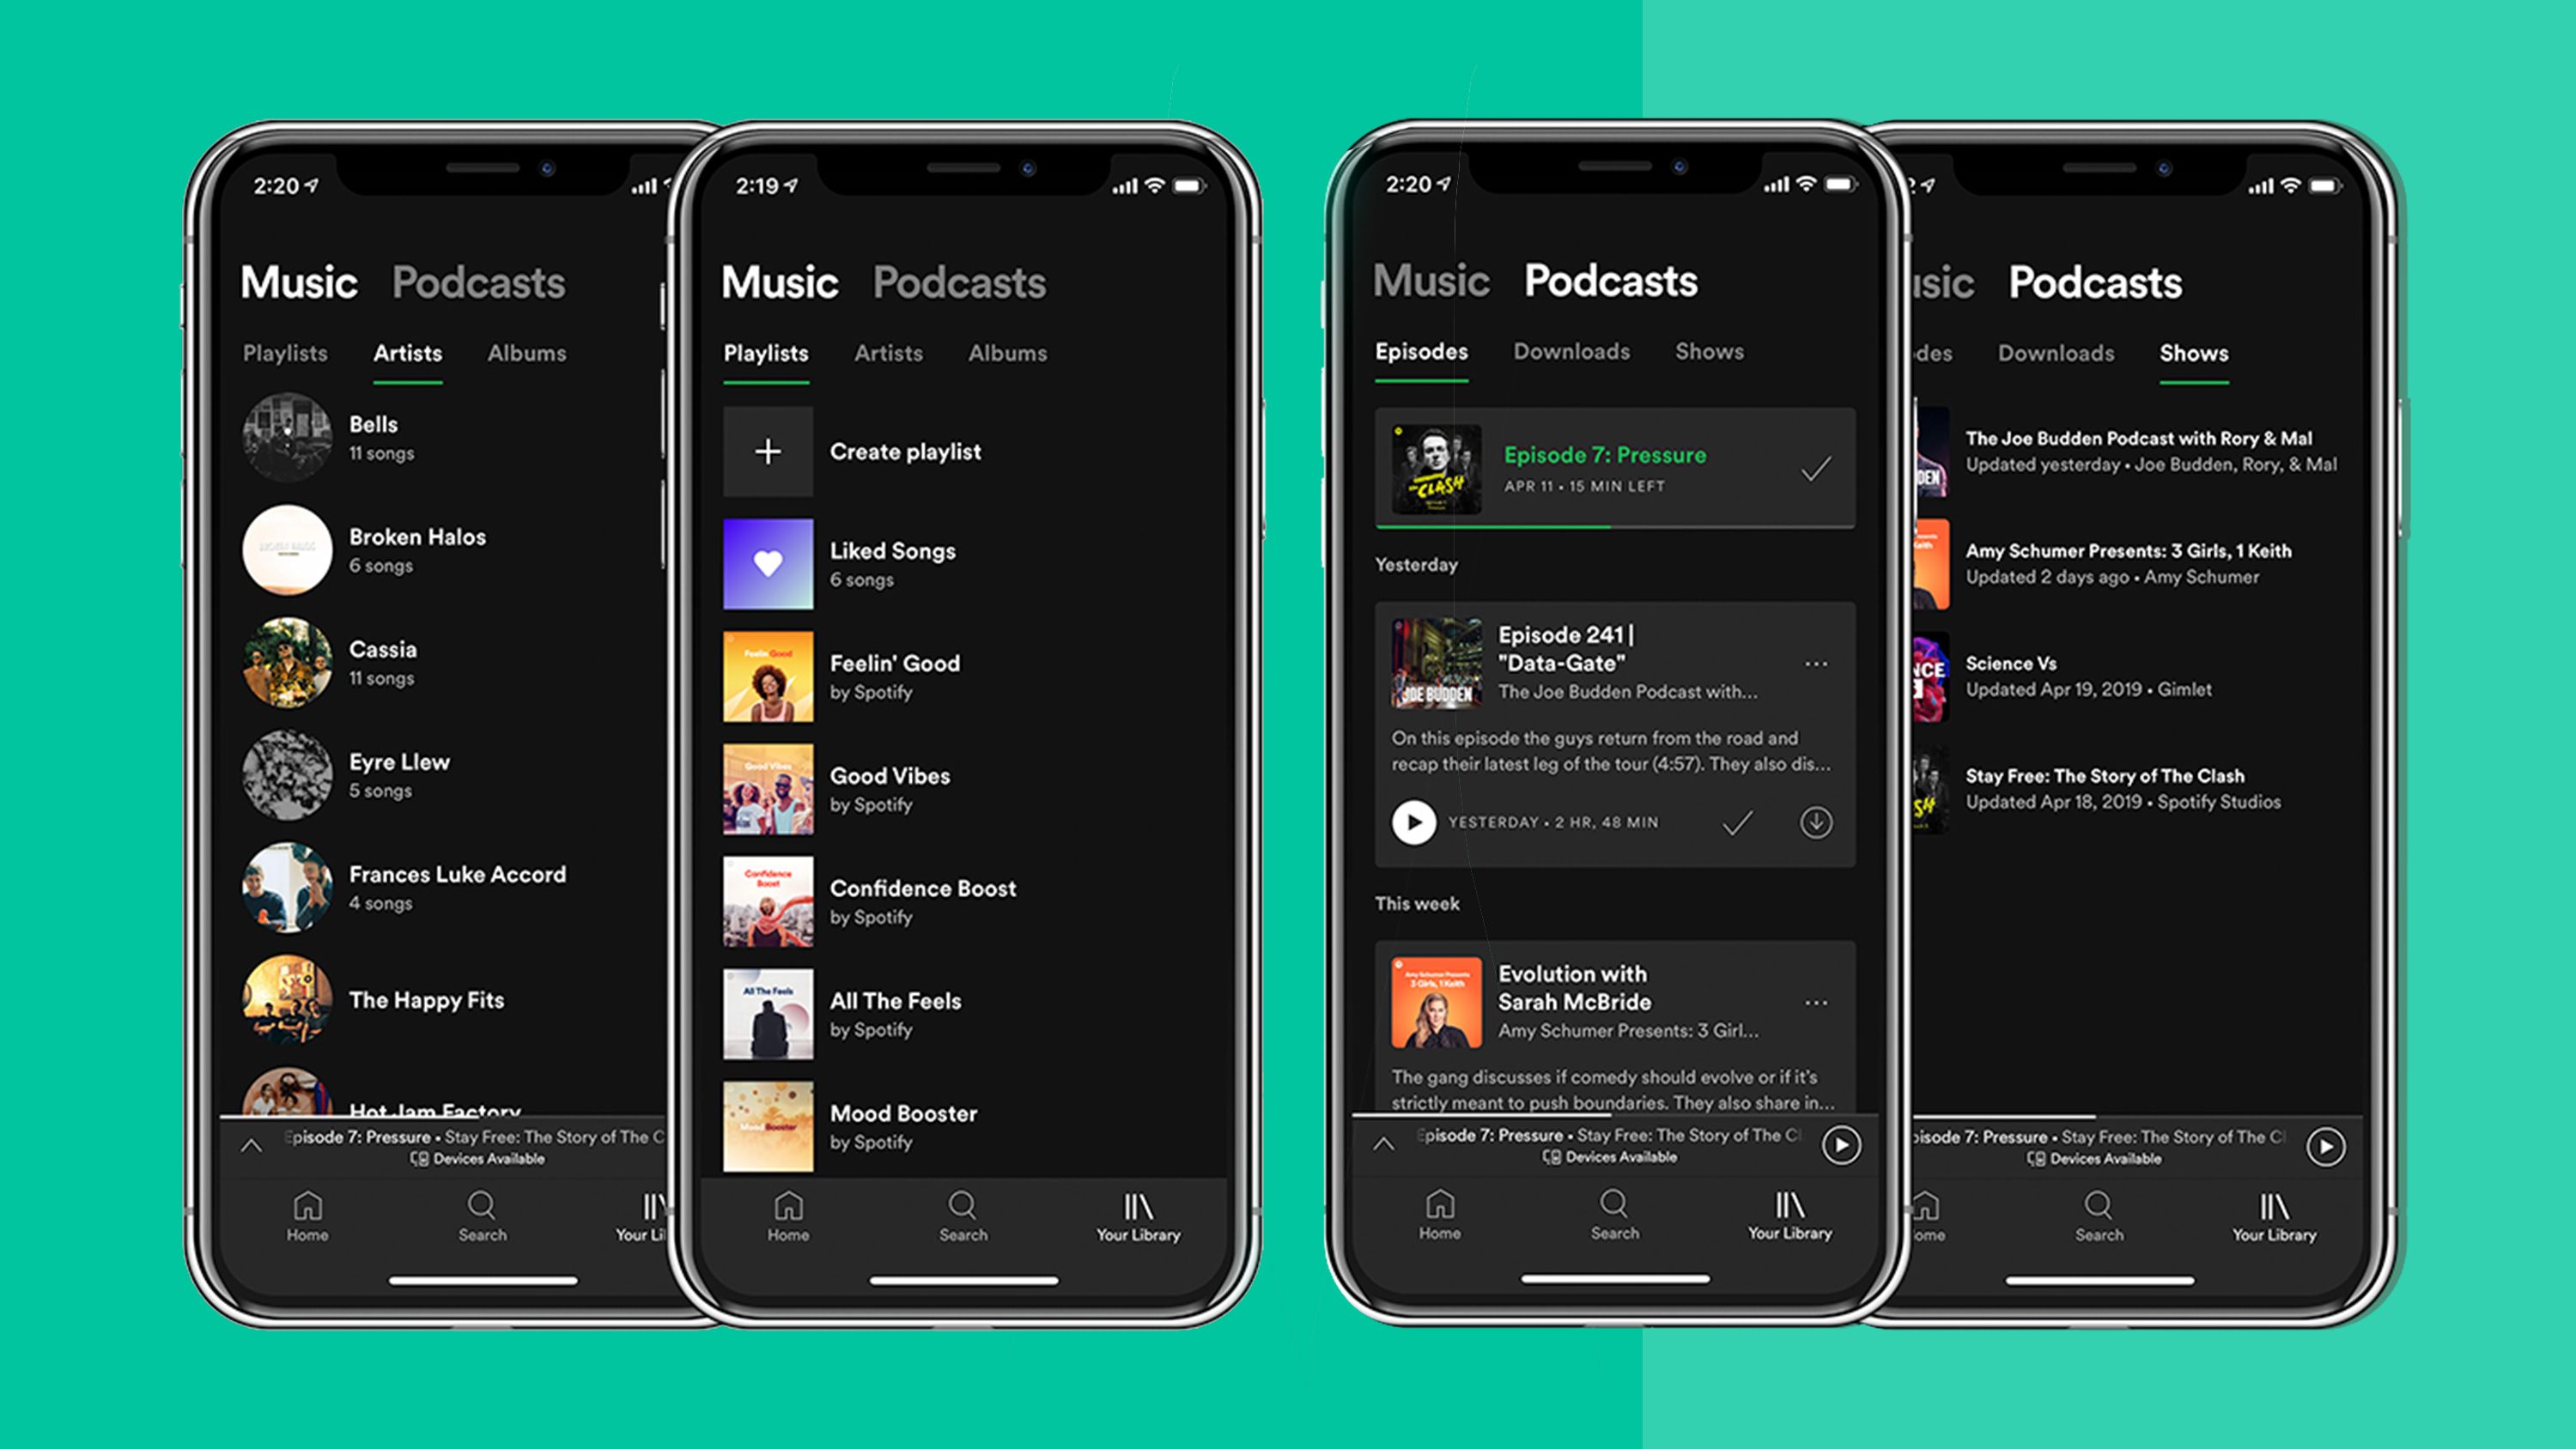 Spotify is betting big on podcasts. Its new redesign shows just